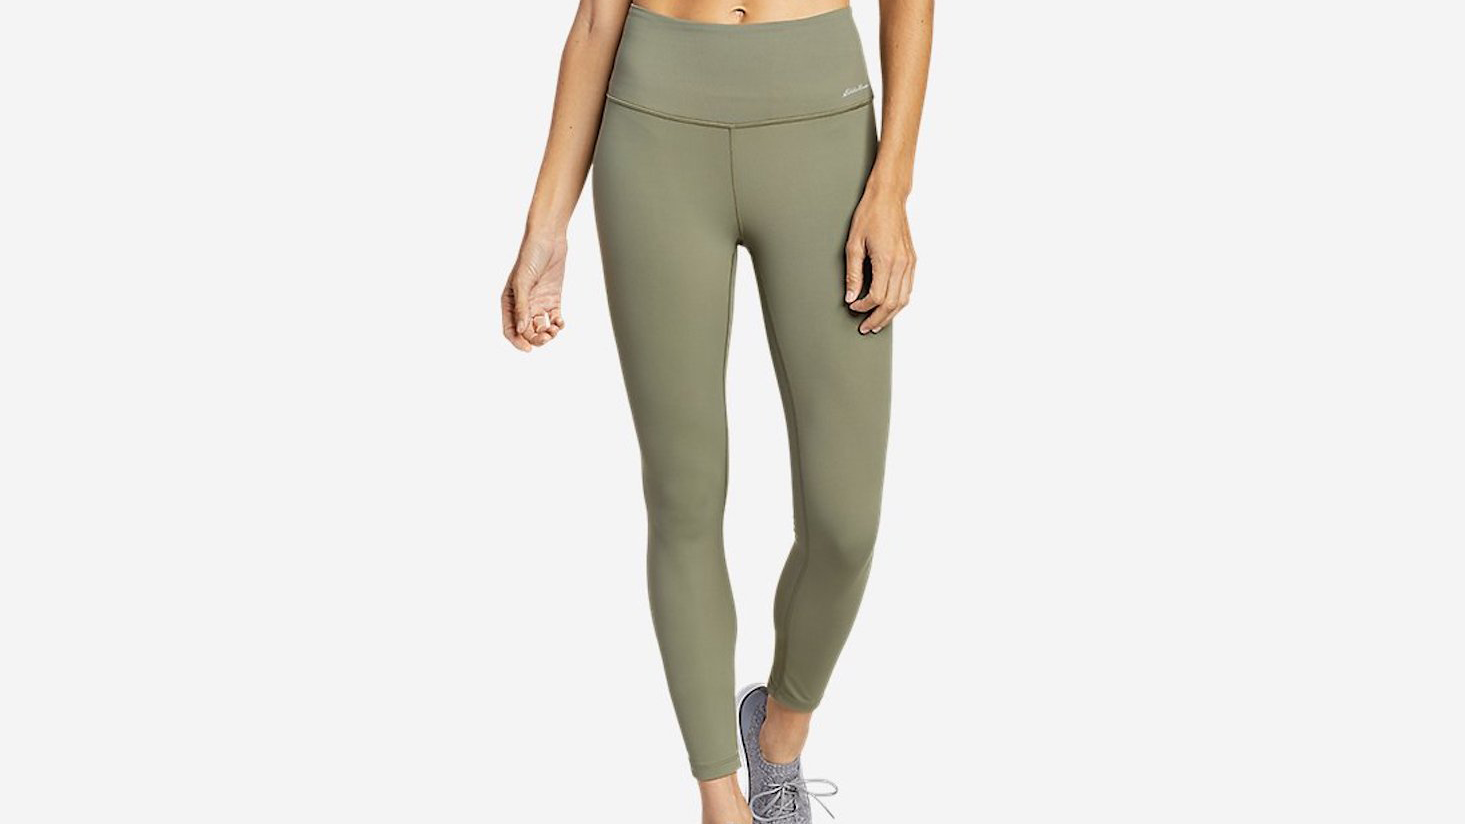 eddie bauer lined leggings for Sale,Up To OFF 67%